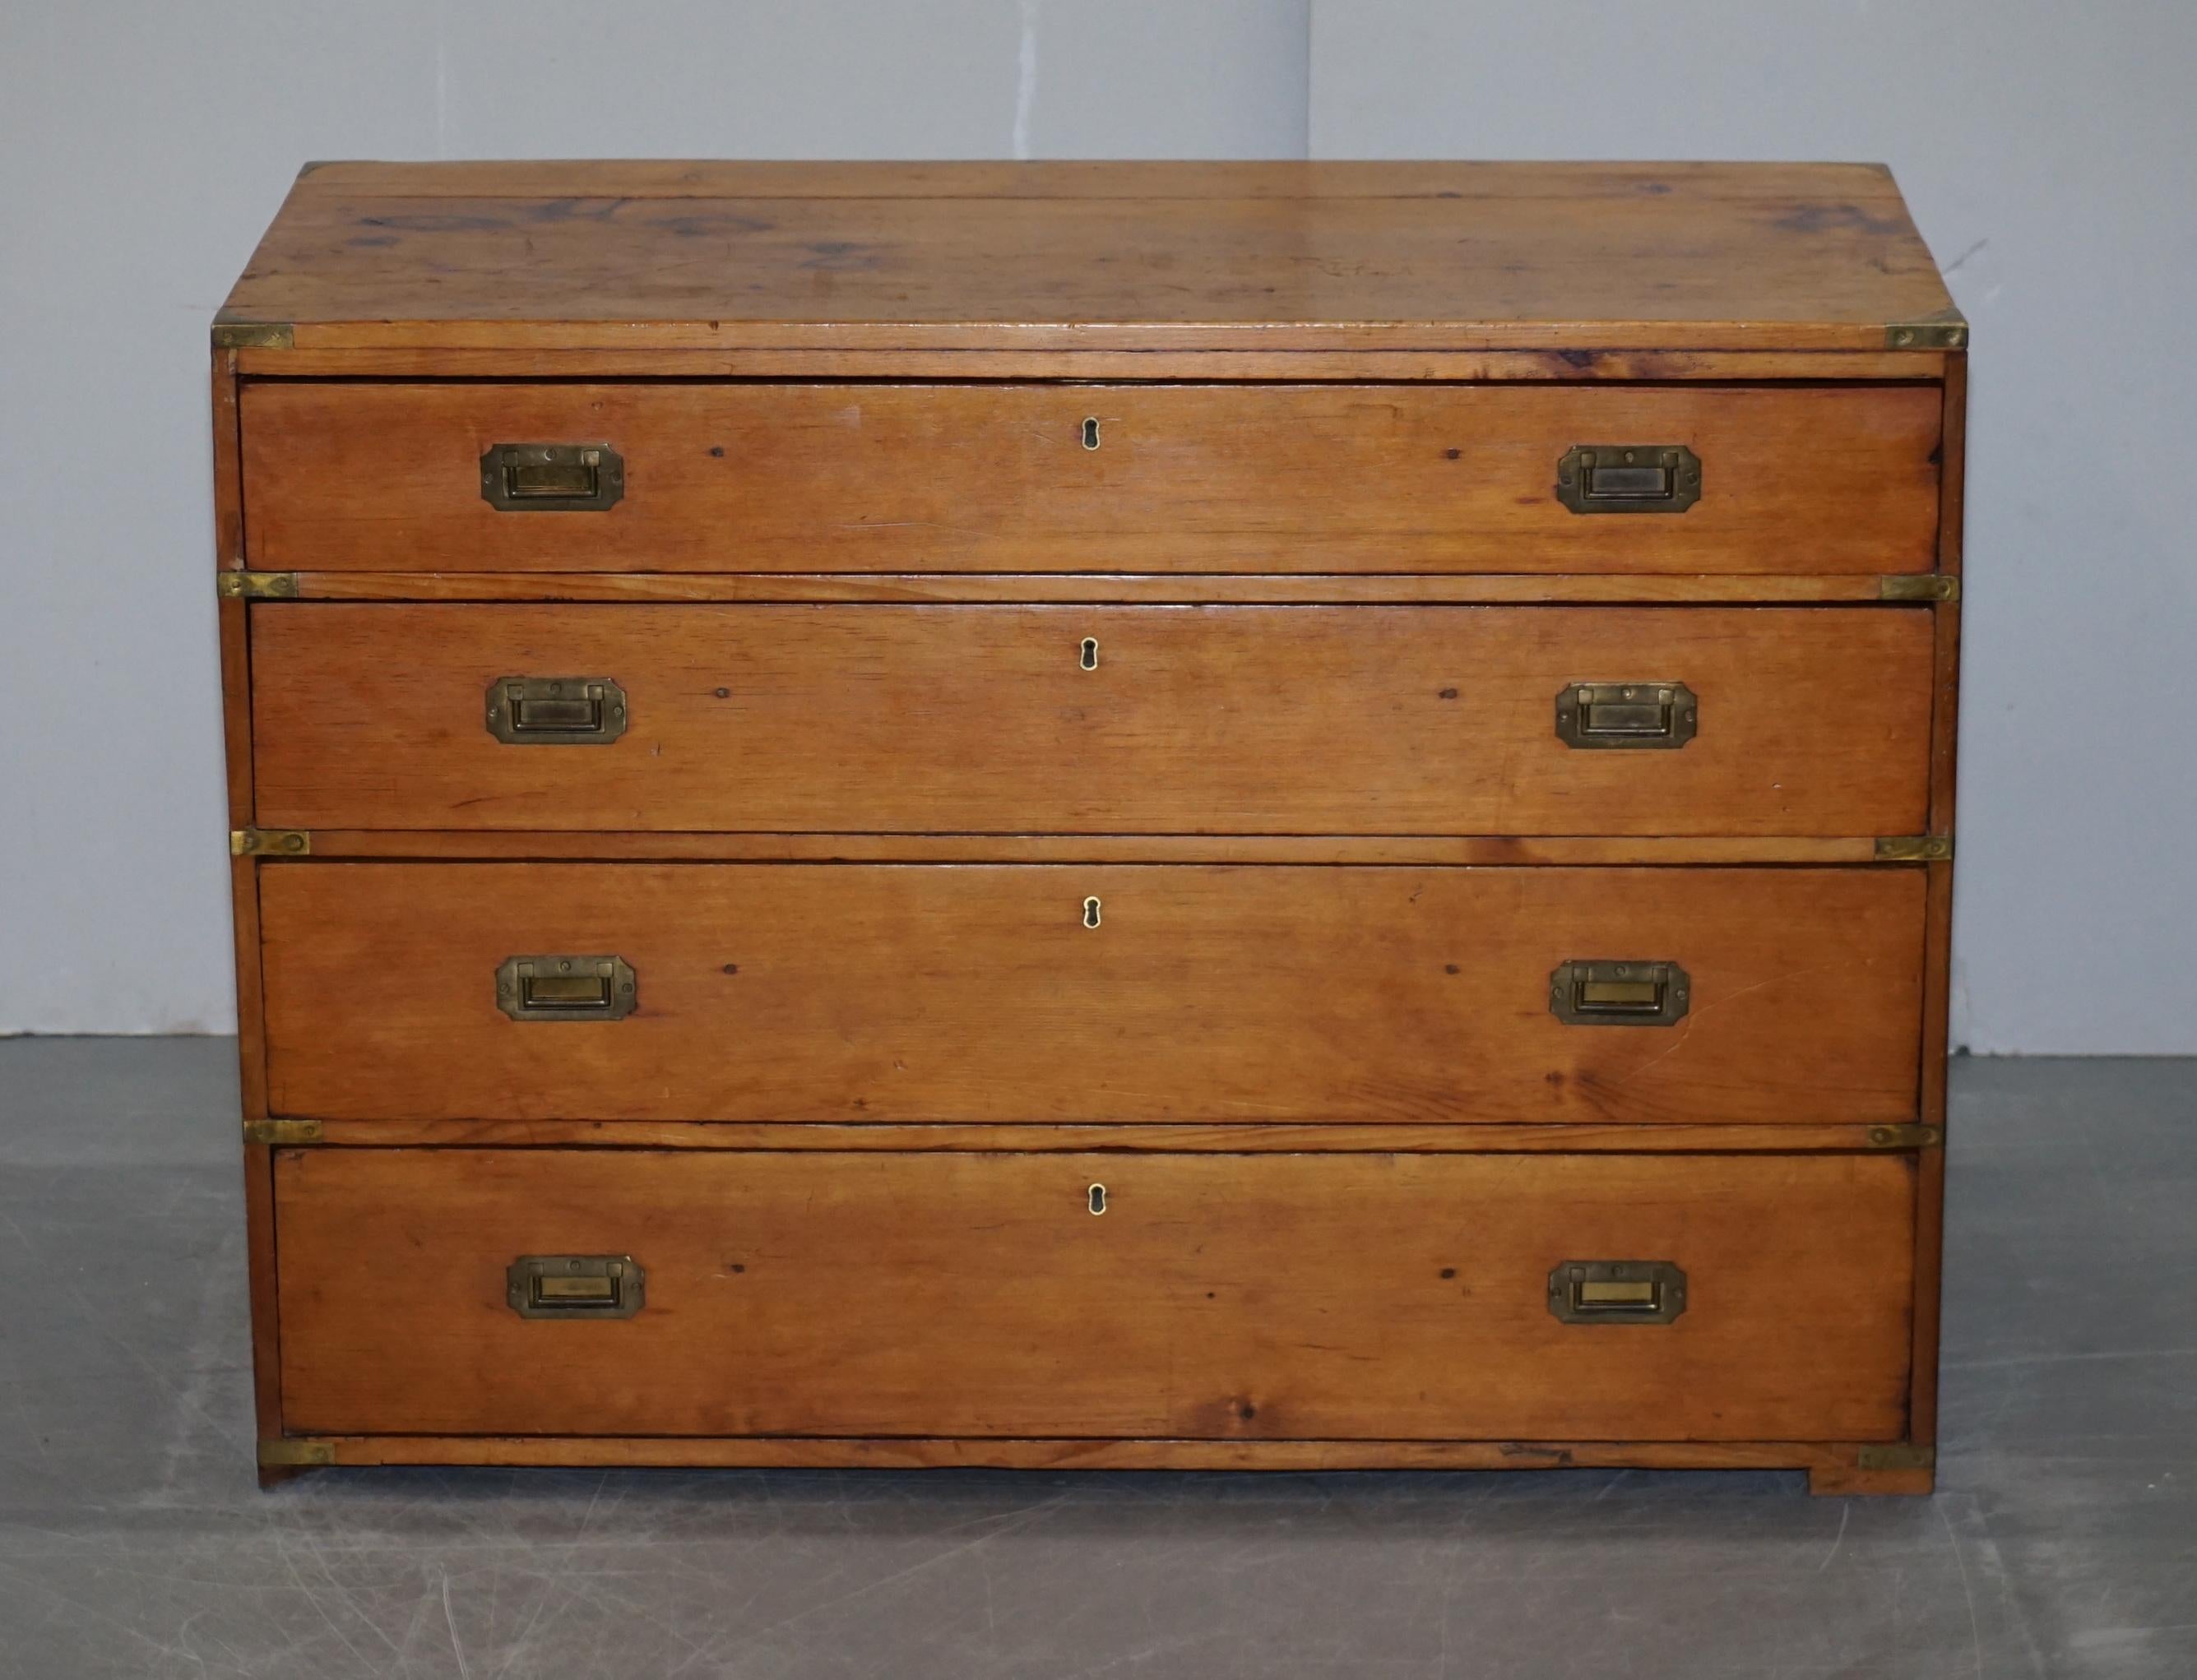 We are delighted to offer for sale this lovely original circa 1880 Victorian pine military campaign chest of drawers with original fittings

A very well made and functional chest of drawers. These are military campaign pieces and look sublime from